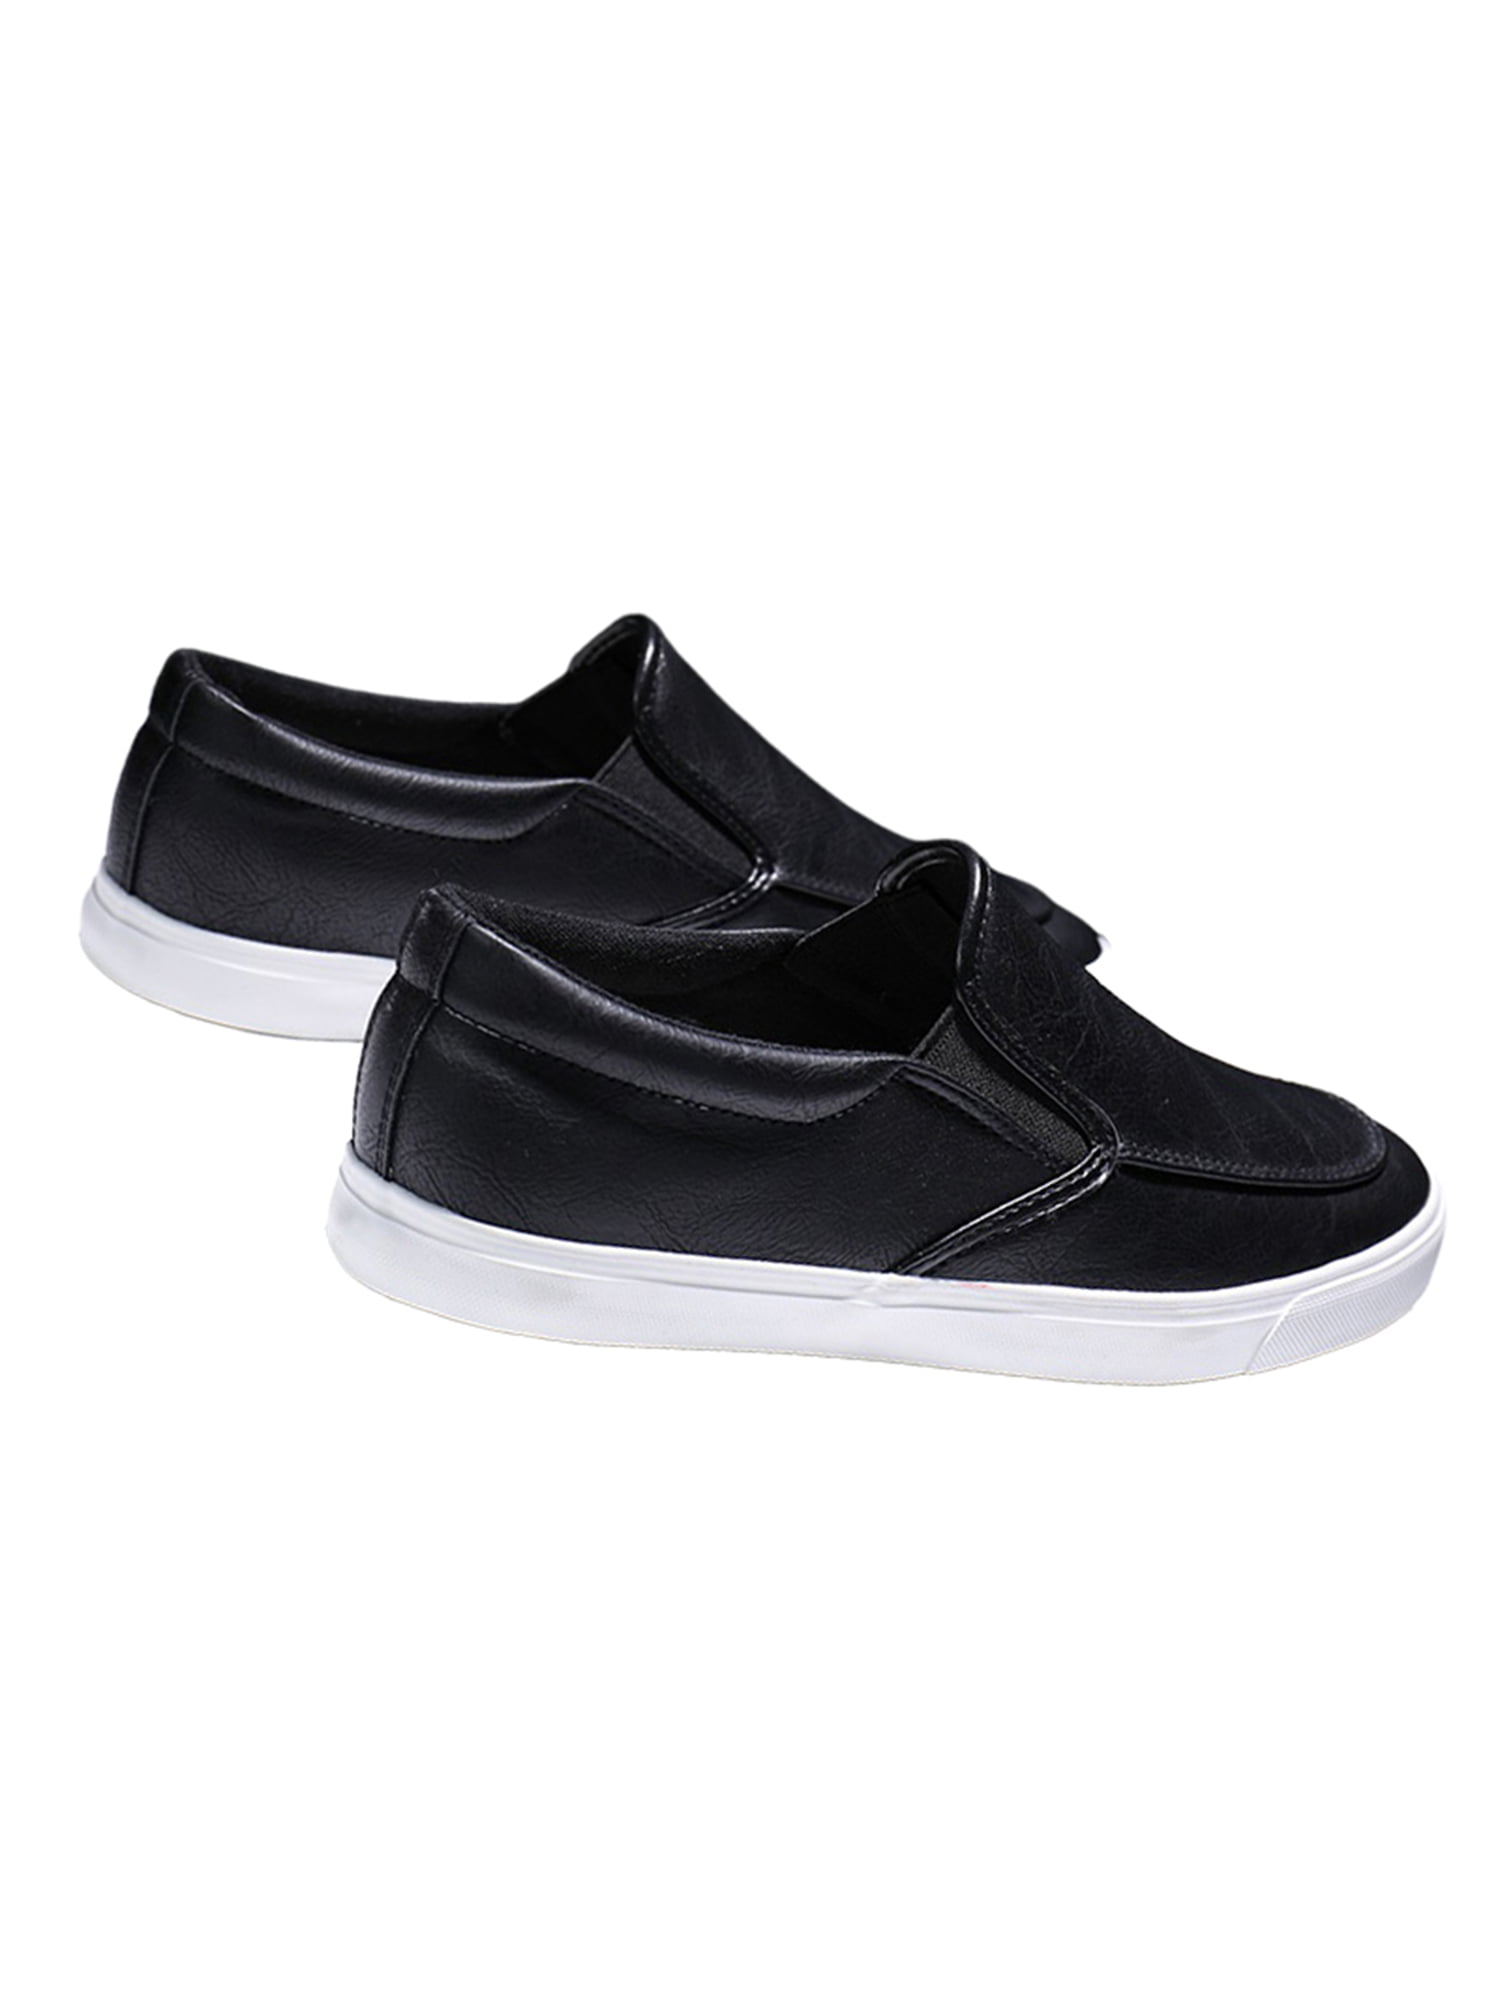 Black Mens Casual Athletic Shoes Fashion Lightweight Leather Driving Sneakers 